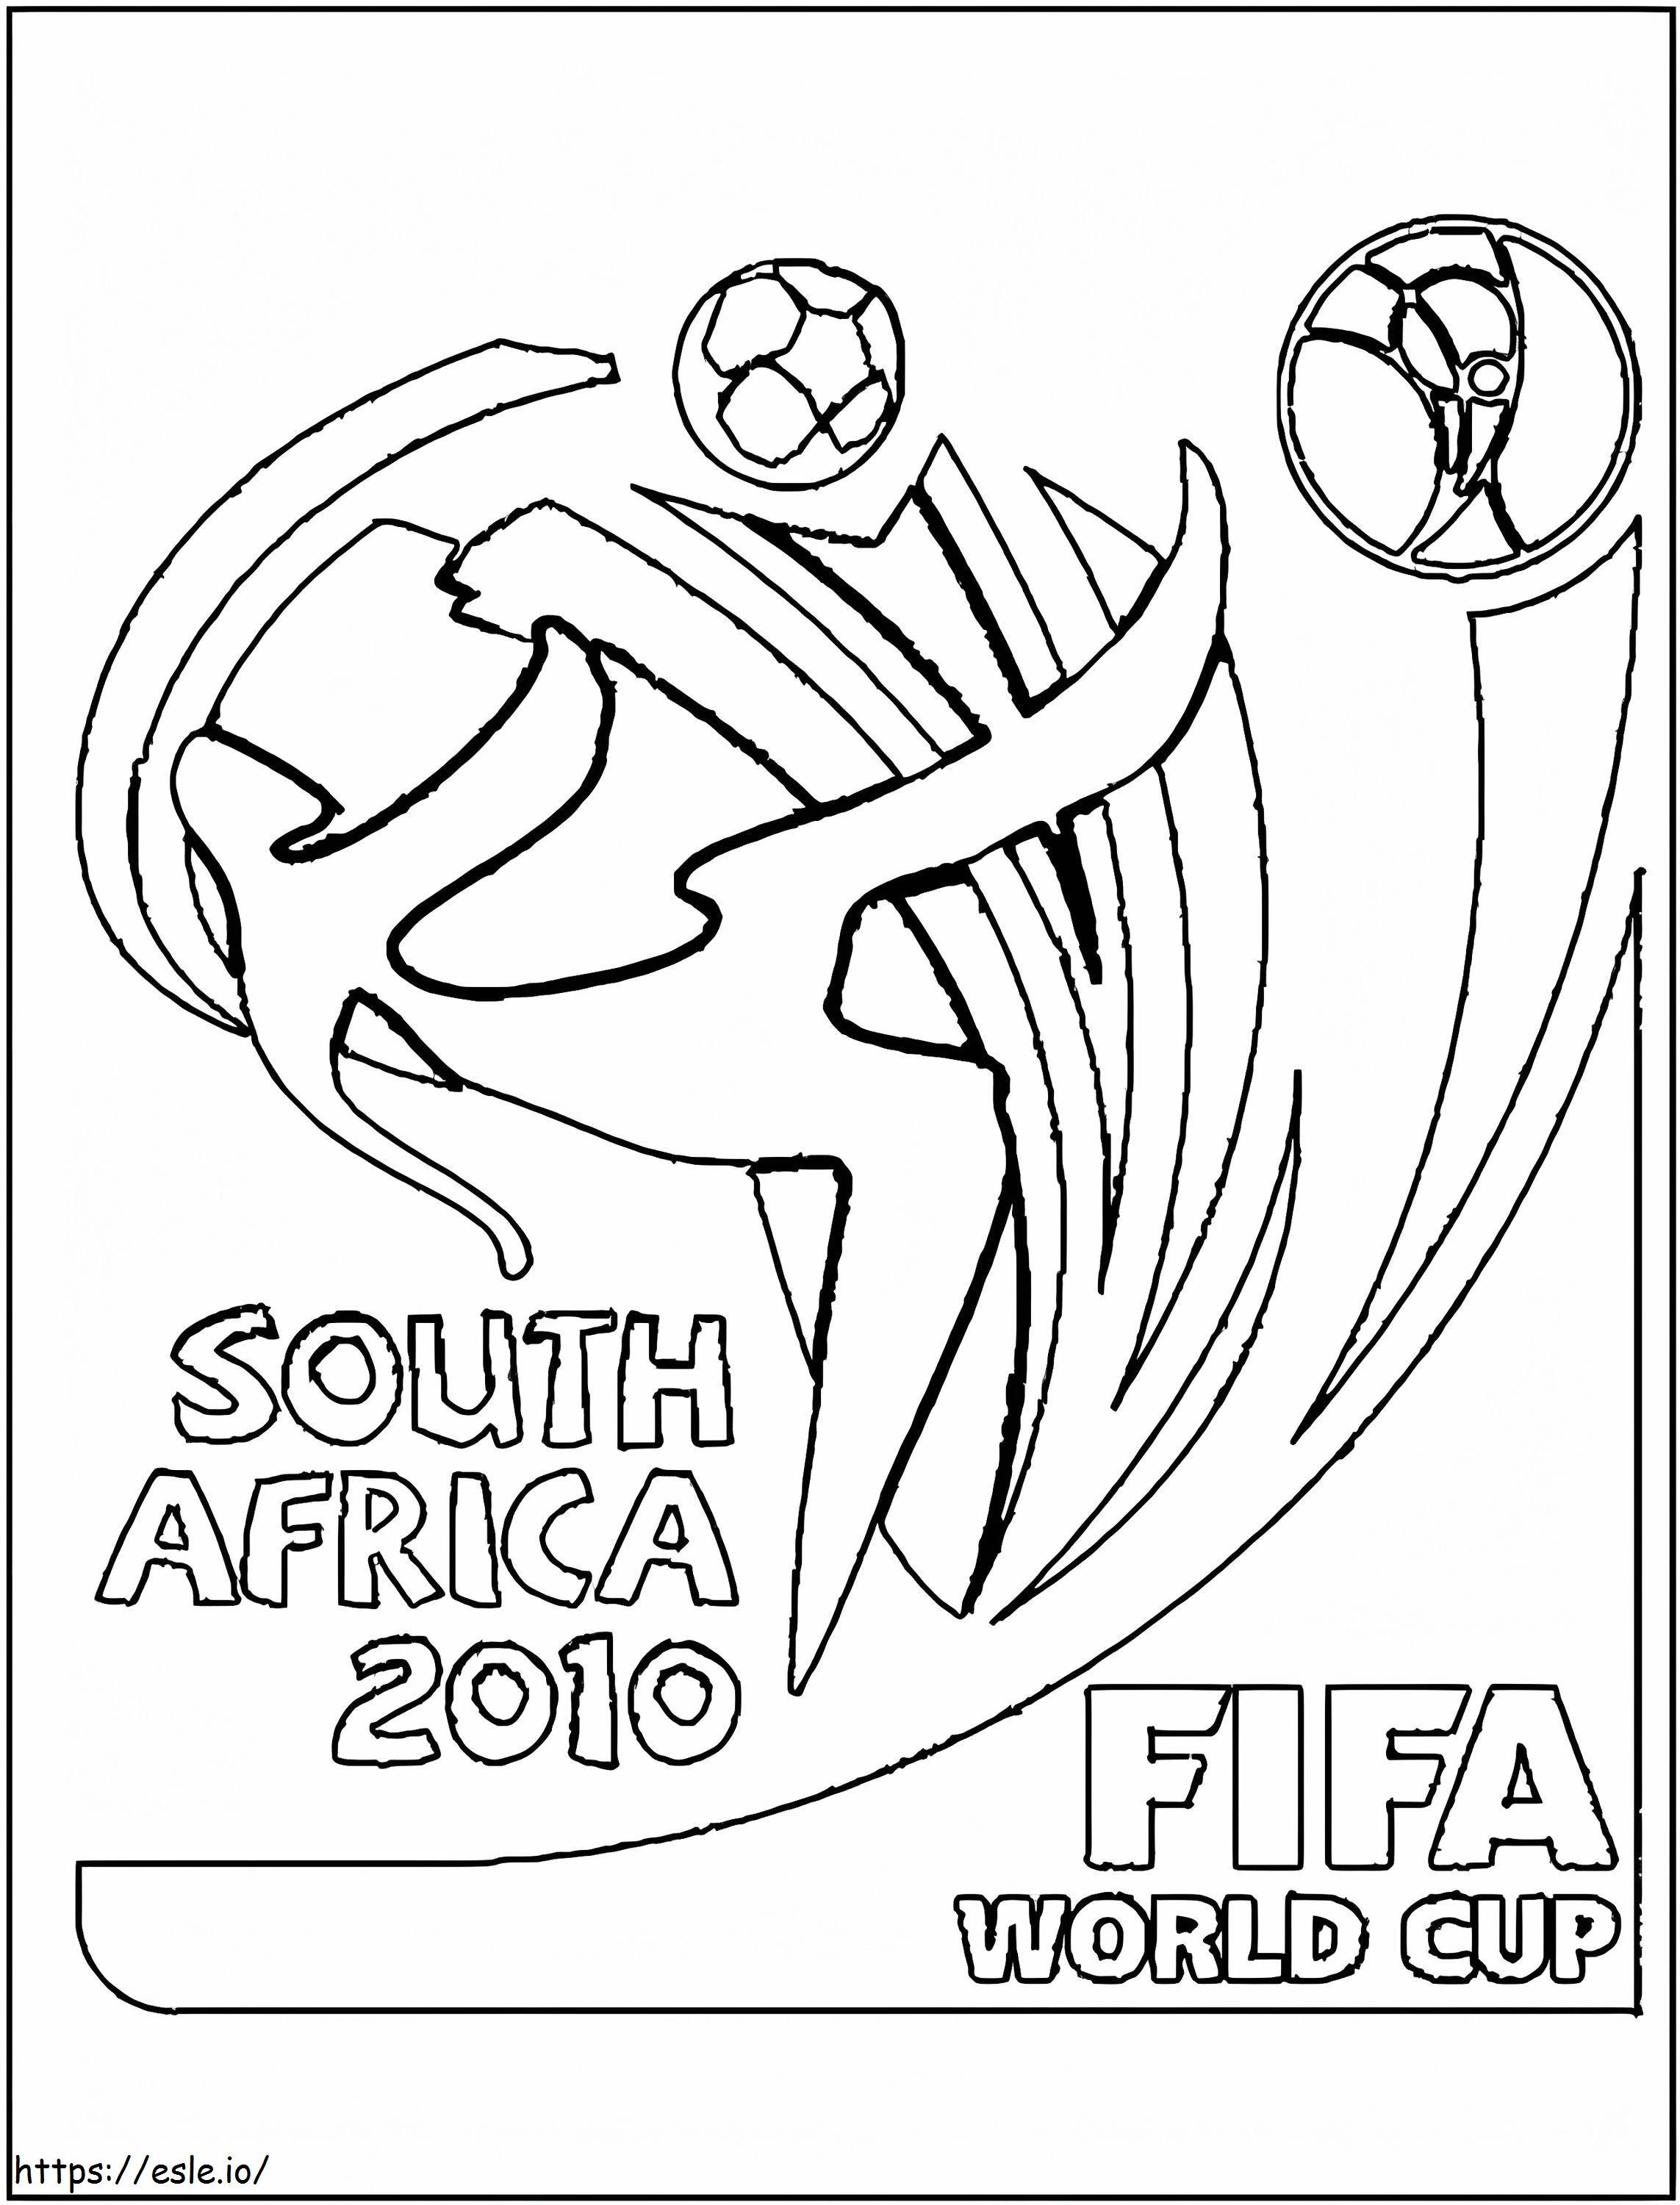 2010 South Africa World Cup coloring page